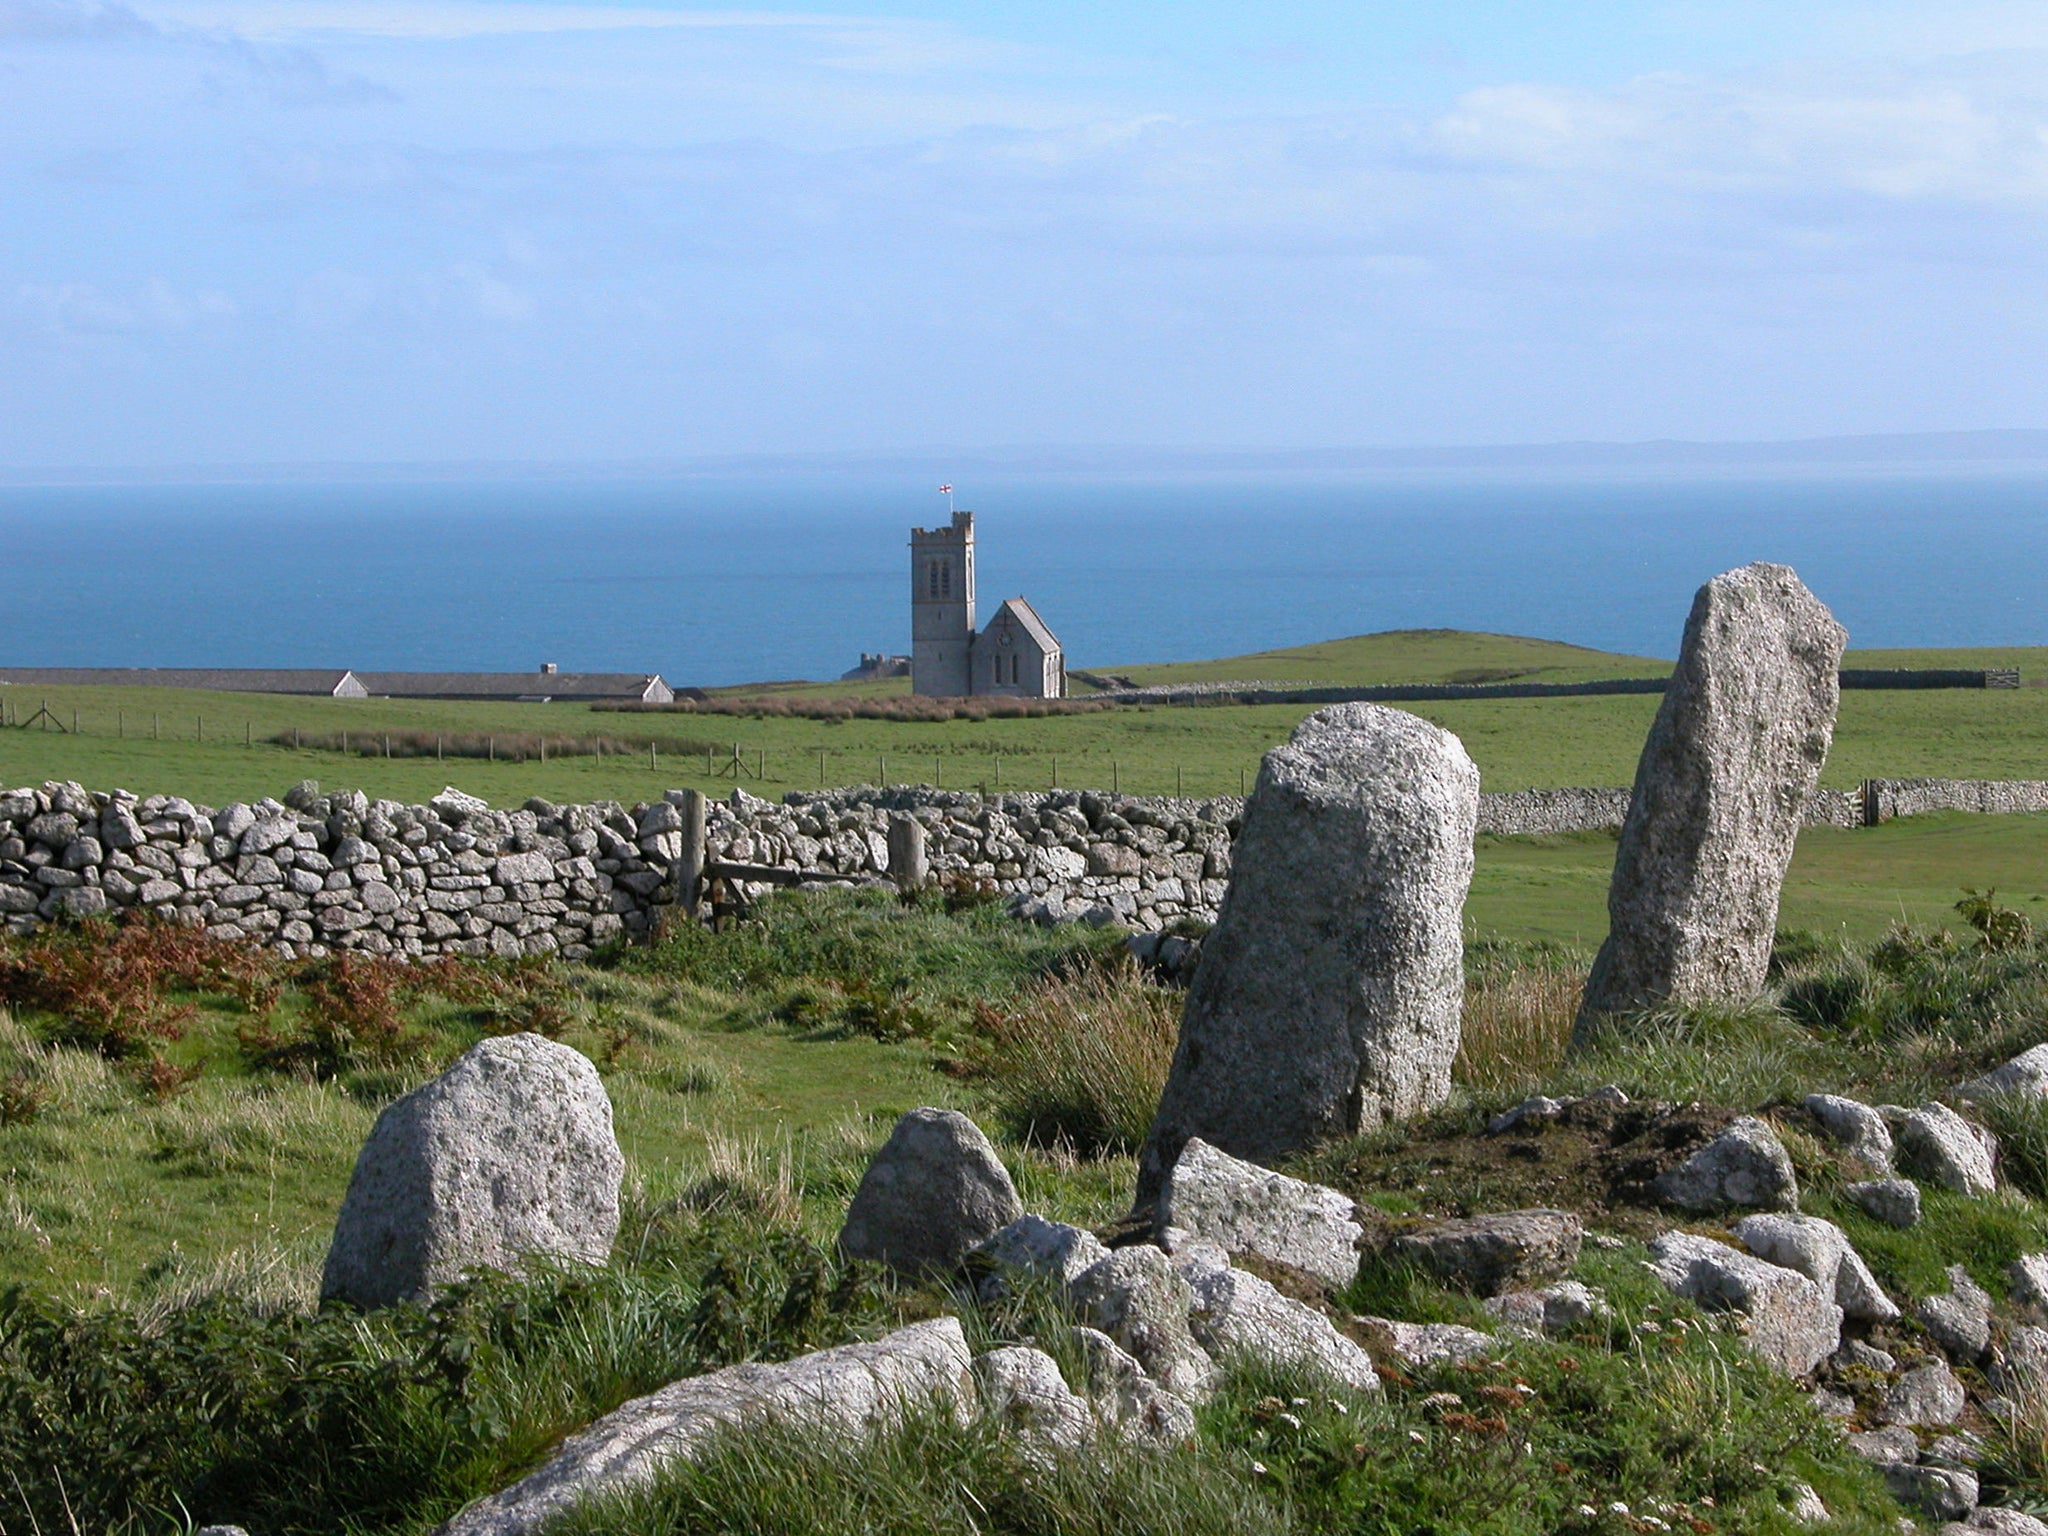 Stone Island. Lundy is blessed with natural good looks and plenty of history